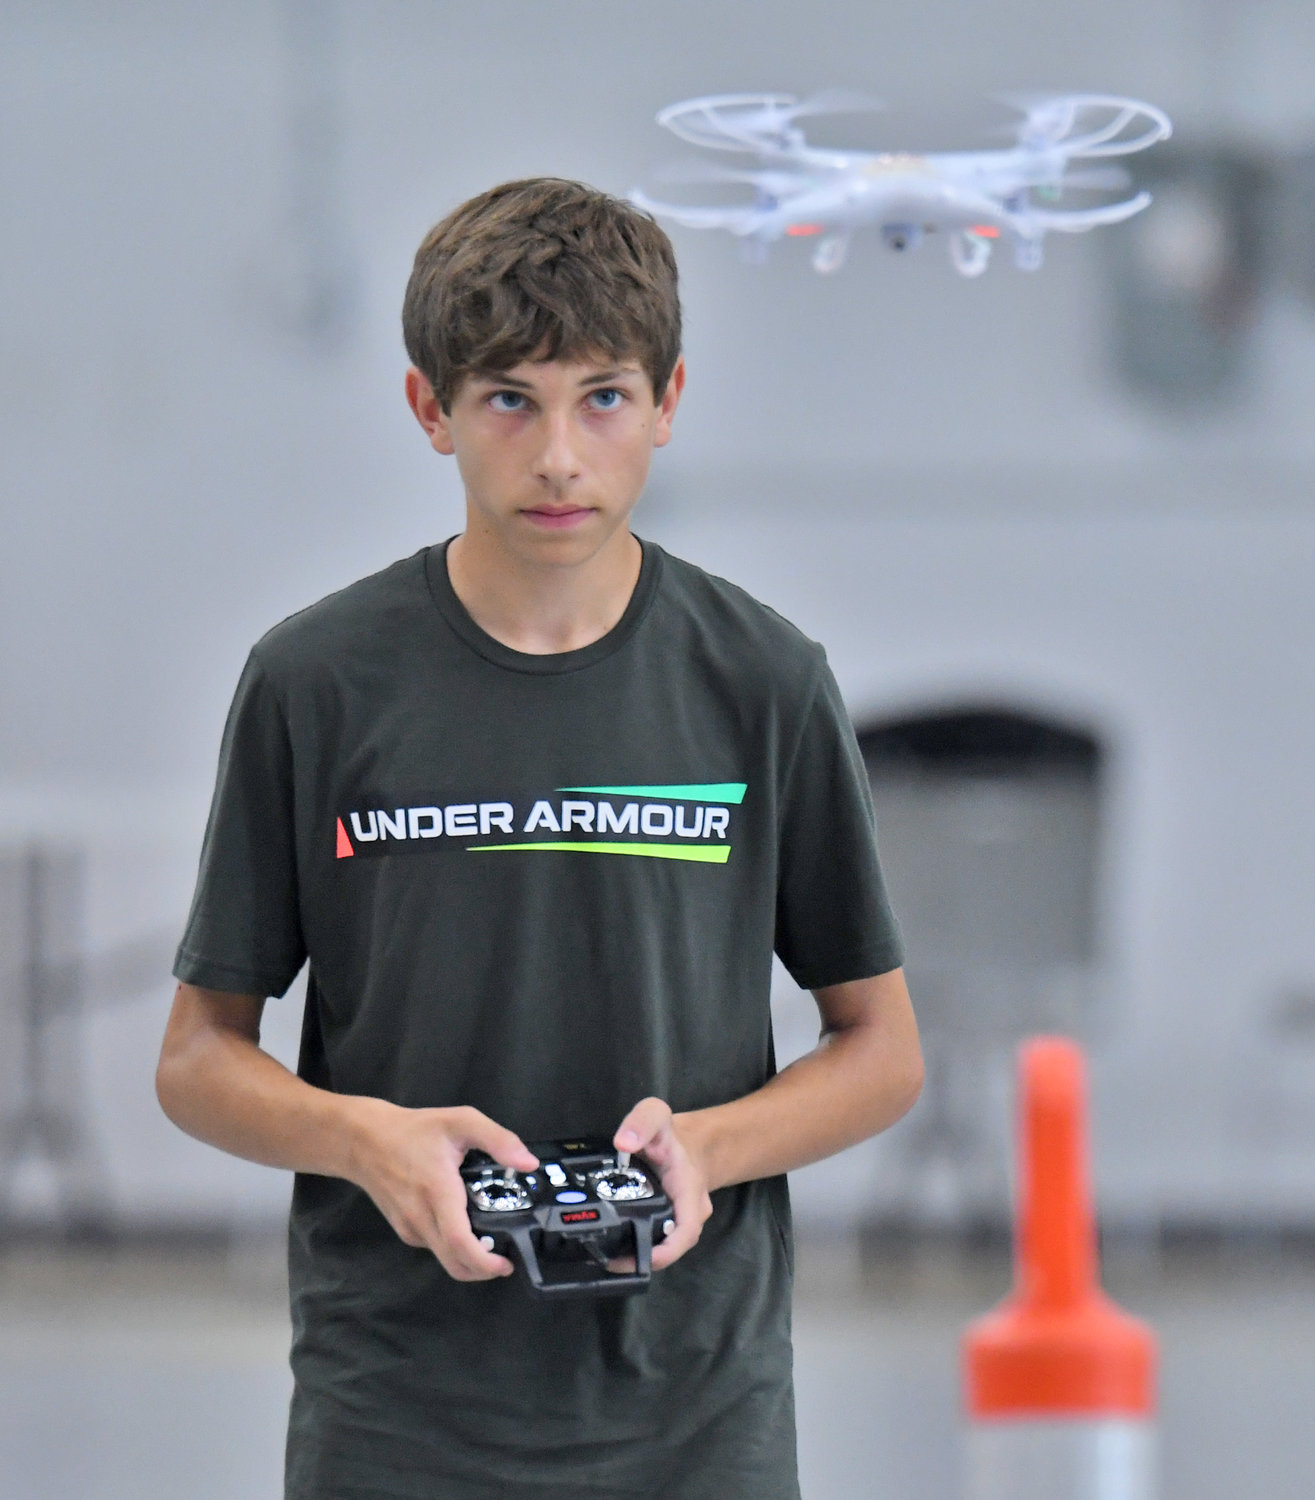 STEELY CONCENTRATION — Oriskany High School student Jack Tagliaferri navigates his drone toward one of the obstacles during the Directorate STEM Outreach Program's Drone Camp in the hangar at Innovare Advancement Center. Campers competed against each other on the final morning of the camp to see who could navigate the course the quickest and most accurately.